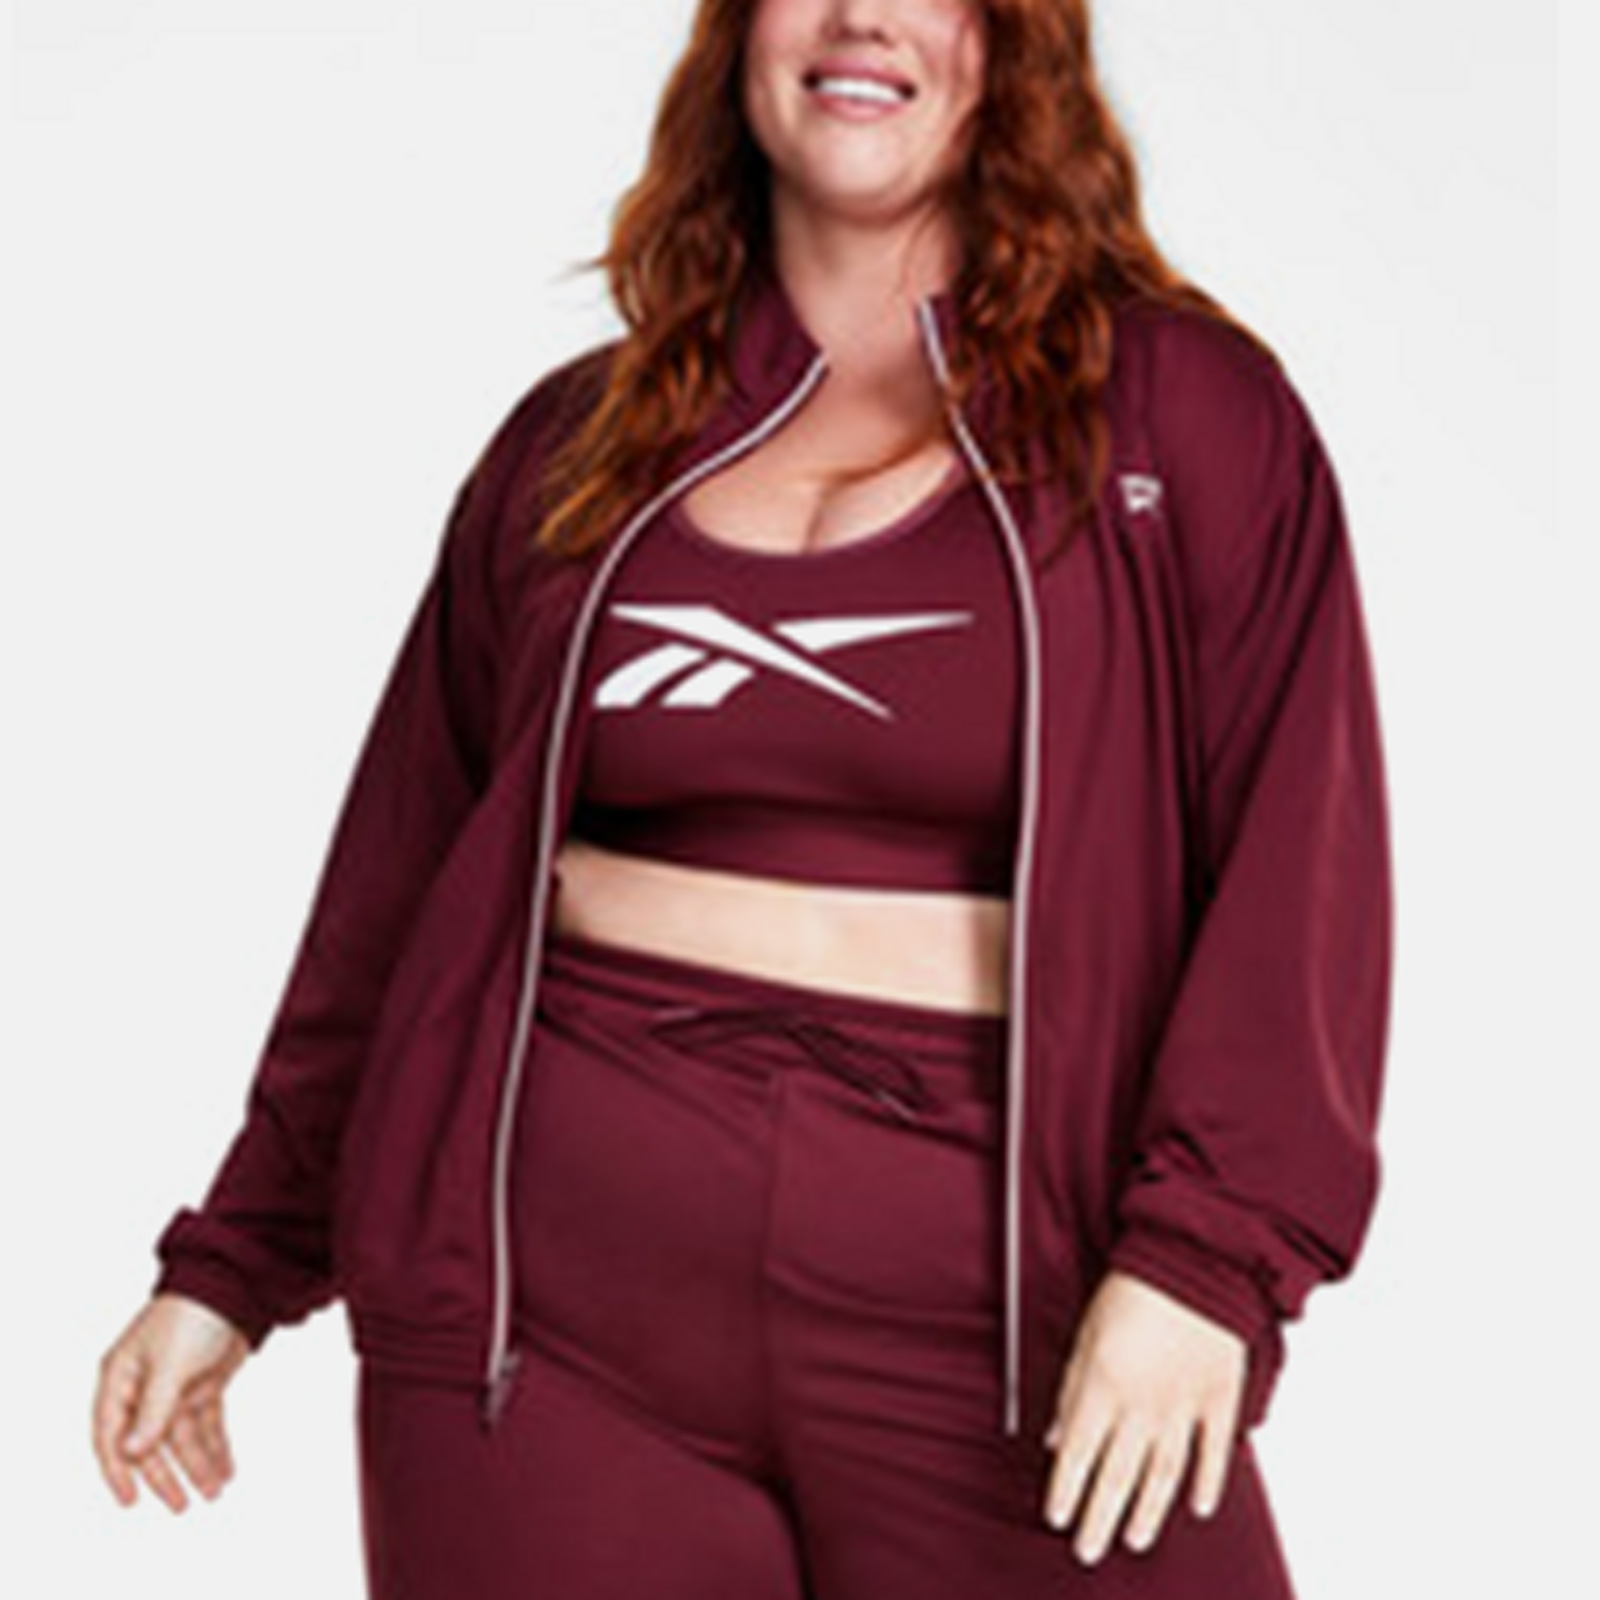 DKNY Performance Workout Clothes: Women's Activewear & Athletic Wear -  Macy's